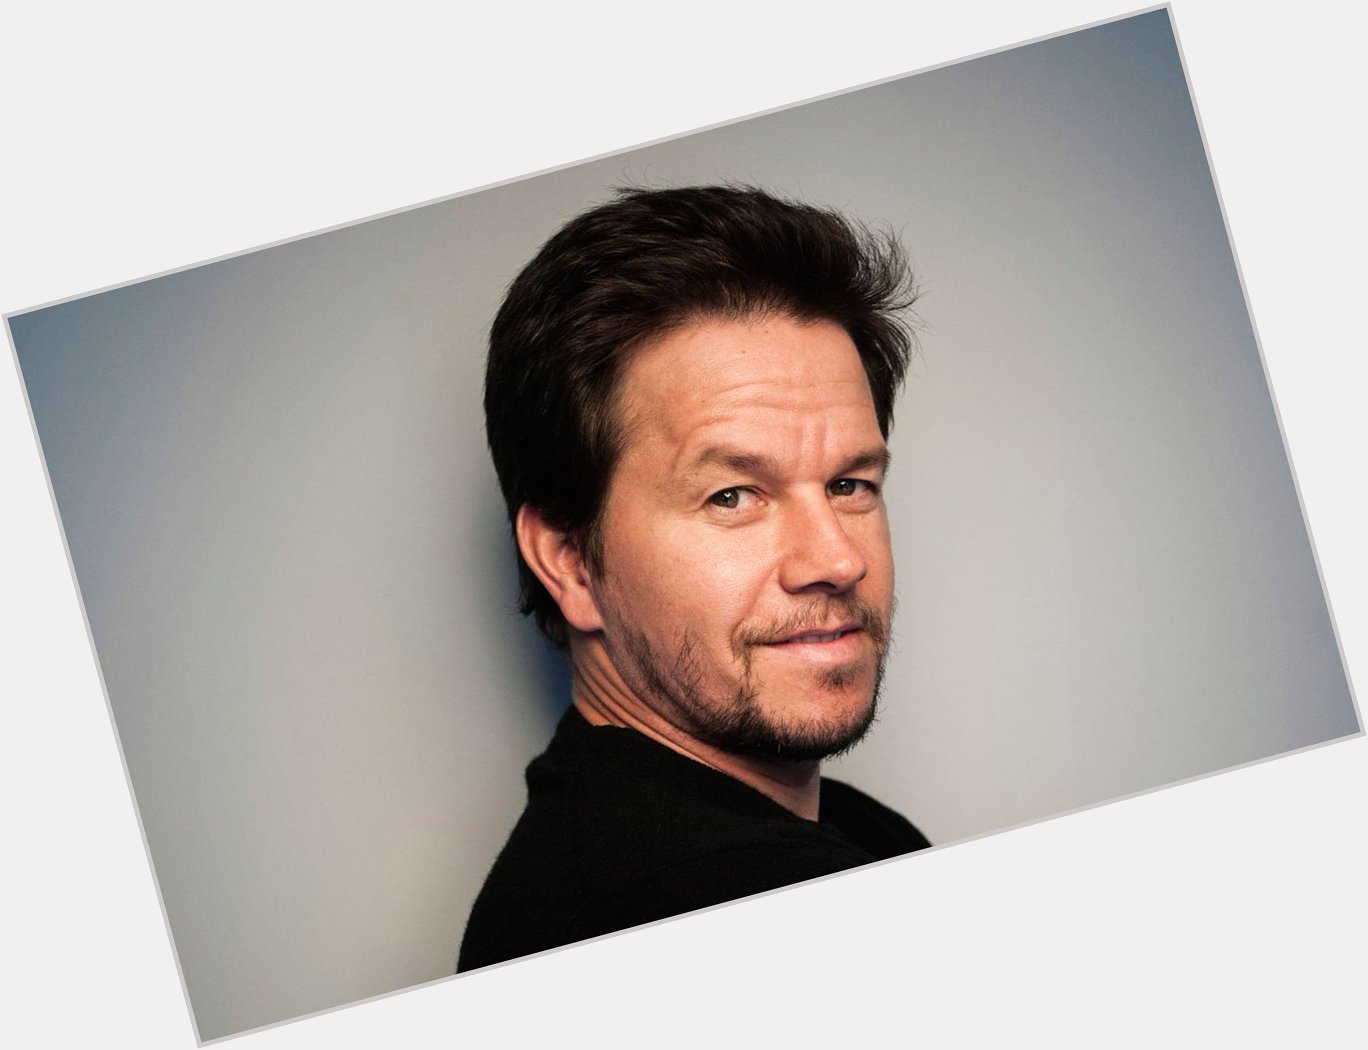 Happy Birthday Mark Wahlberg! The handsome and charming star is celebrating his 46th birthday today 